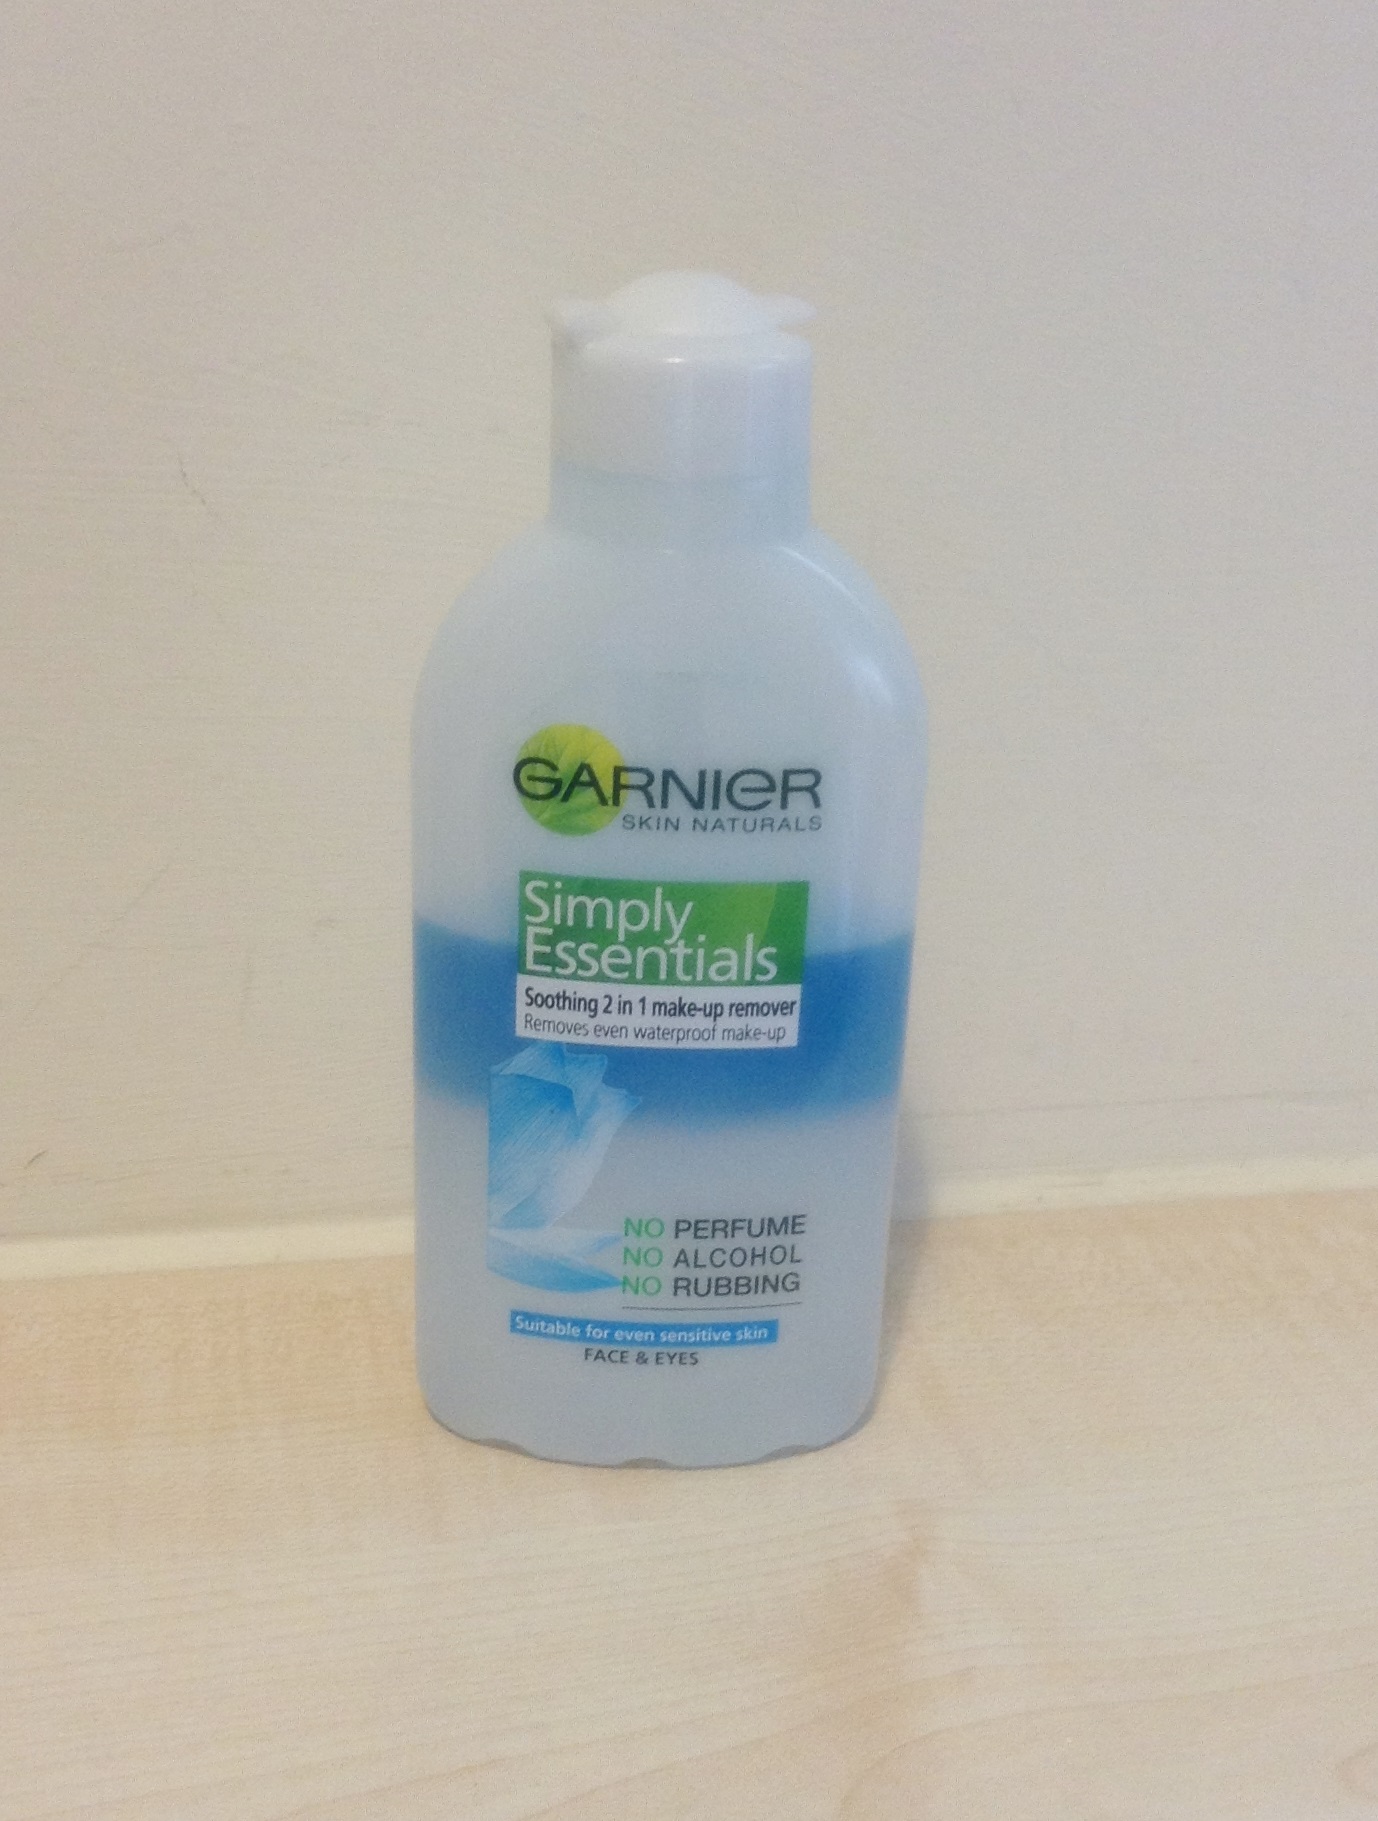  Garnier  simply essentials 2 in 1 makeup  remover  Chronic 